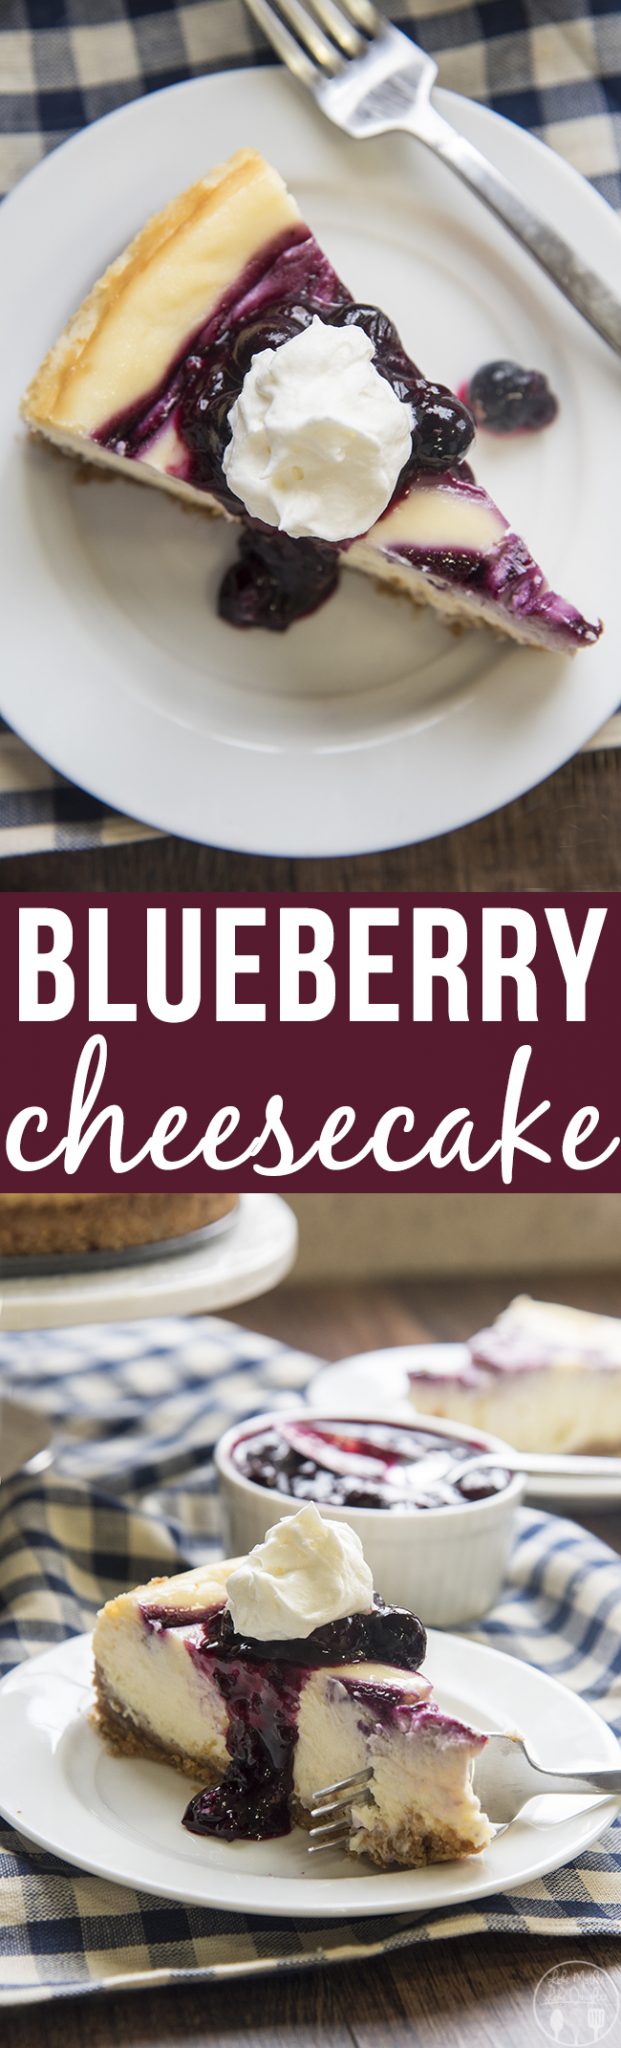 Blueberry cheesecake on a plate with a Blueberry Cheesecake text overlay.